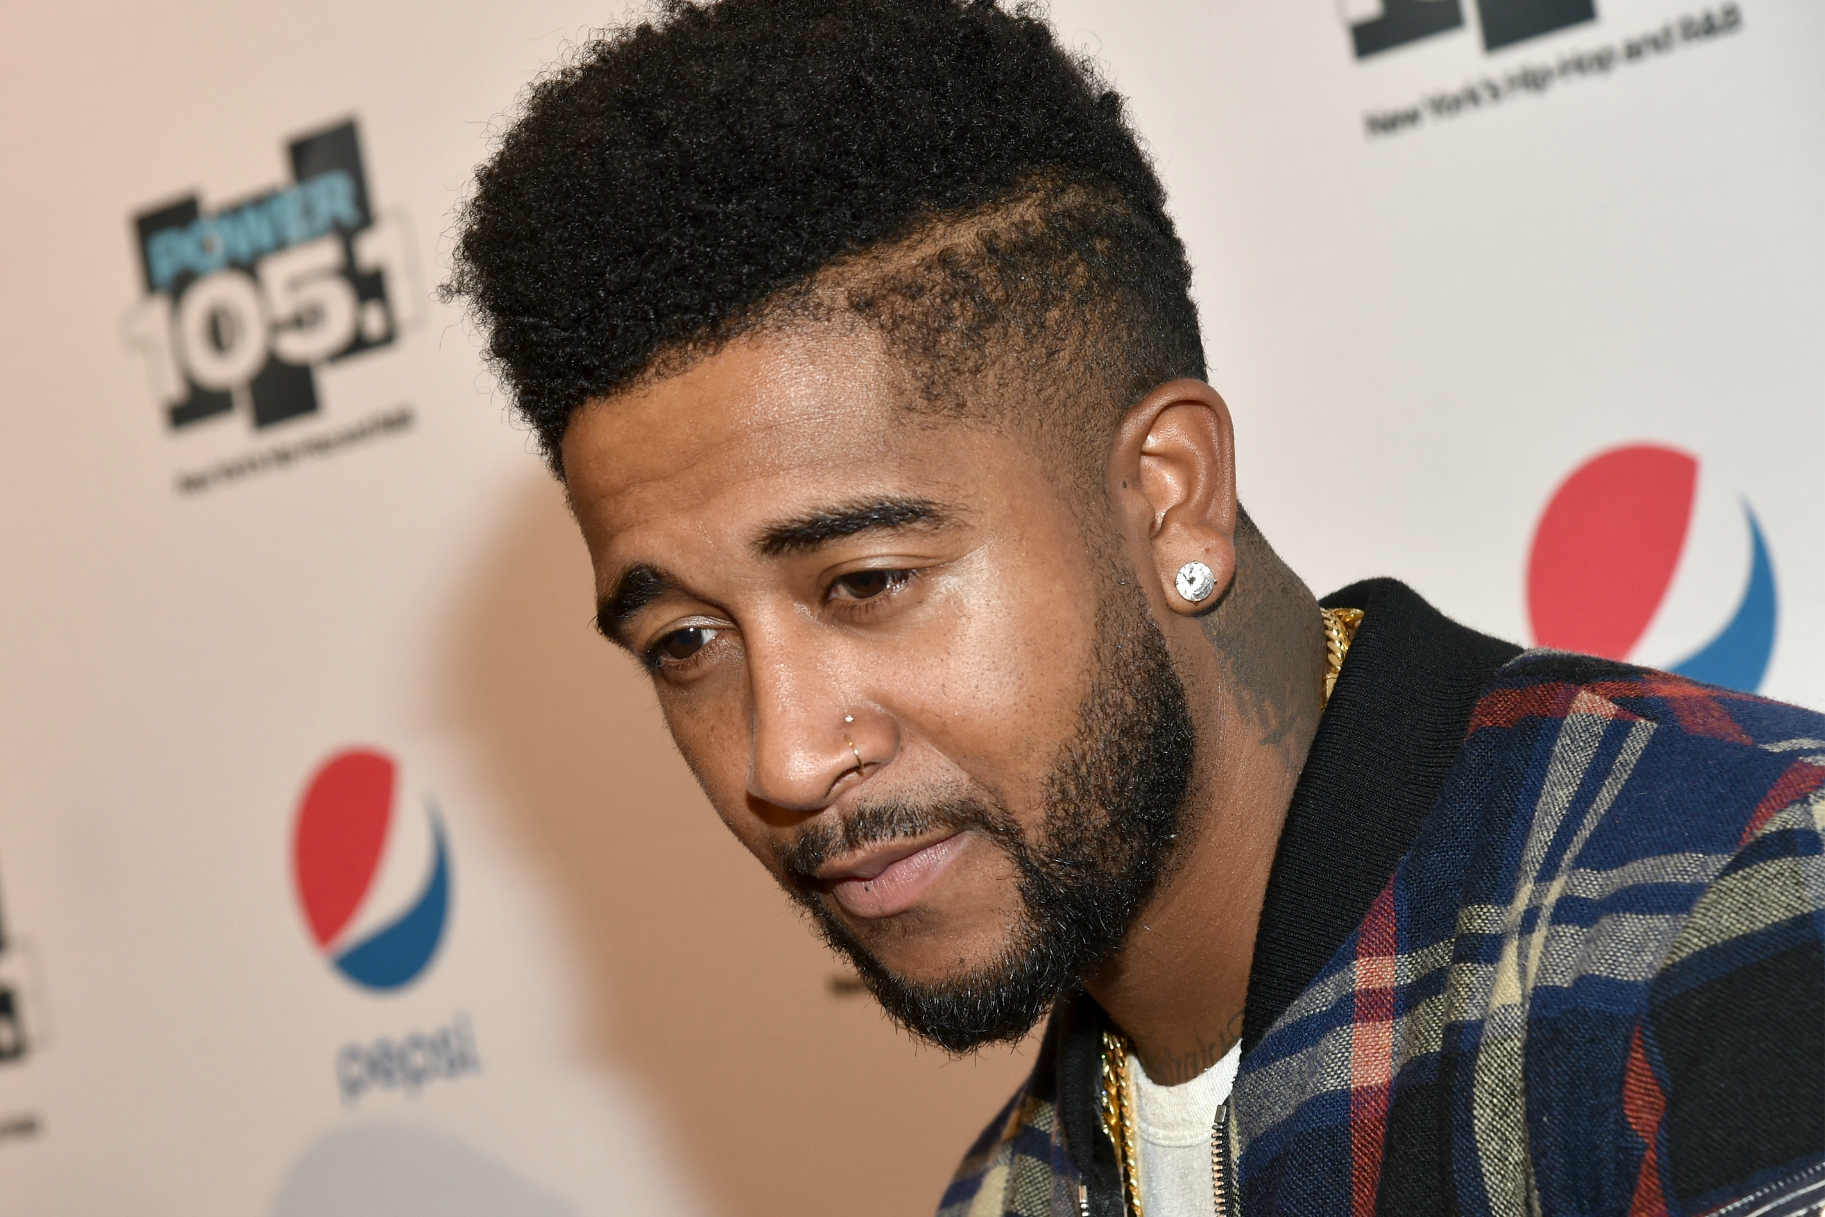 Omarion Performed for a Nearly Empty Show.